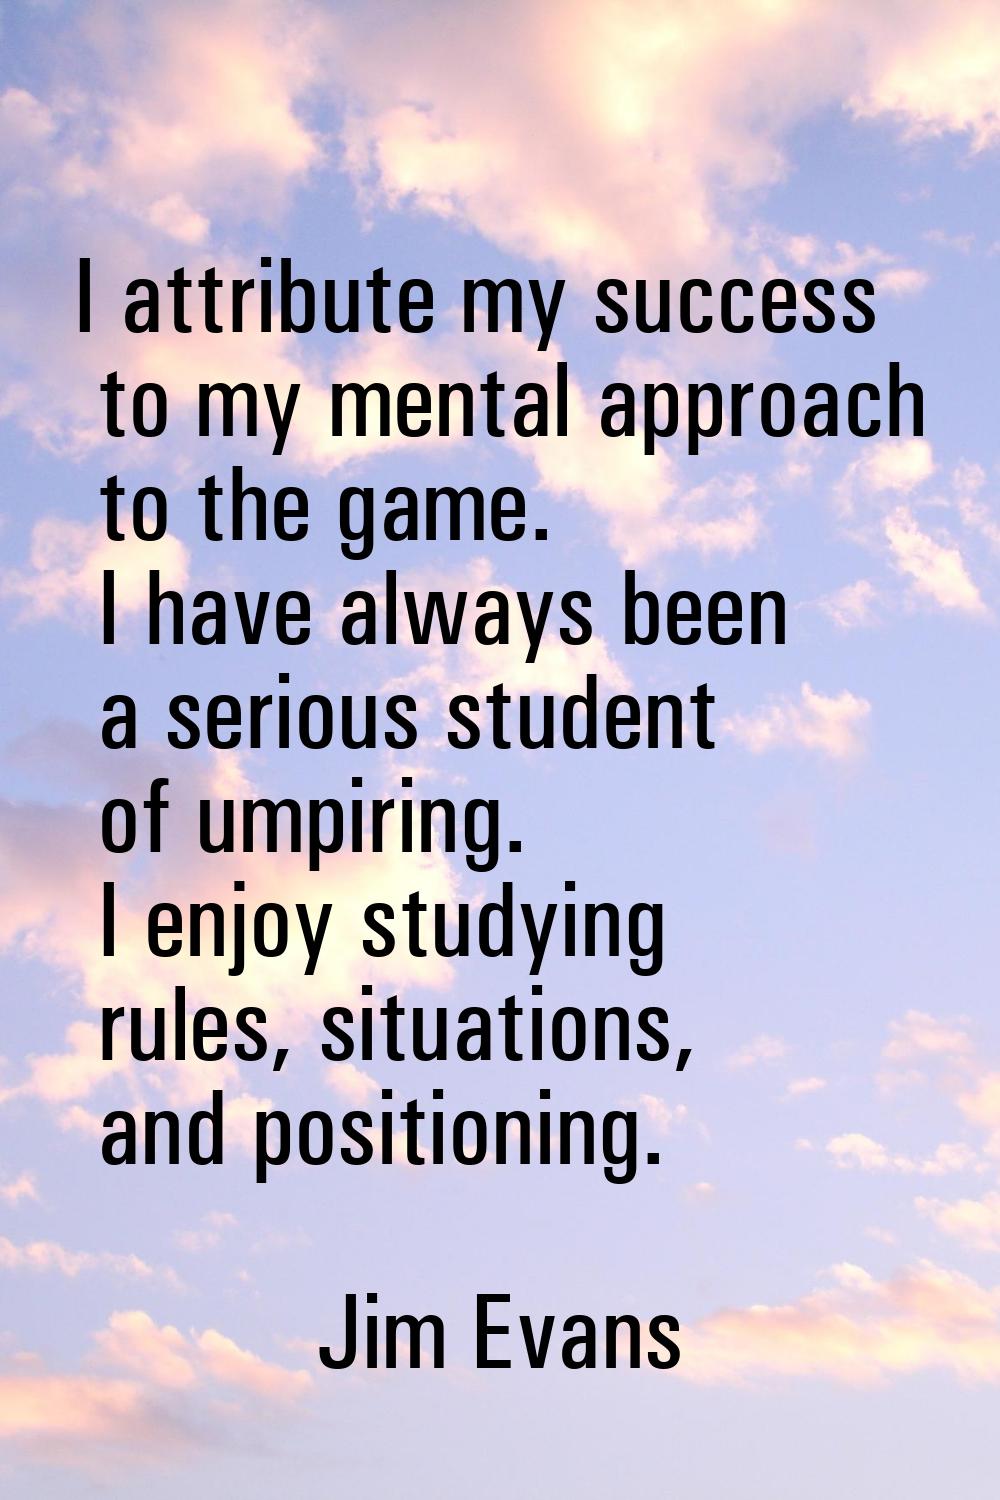 I attribute my success to my mental approach to the game. I have always been a serious student of u